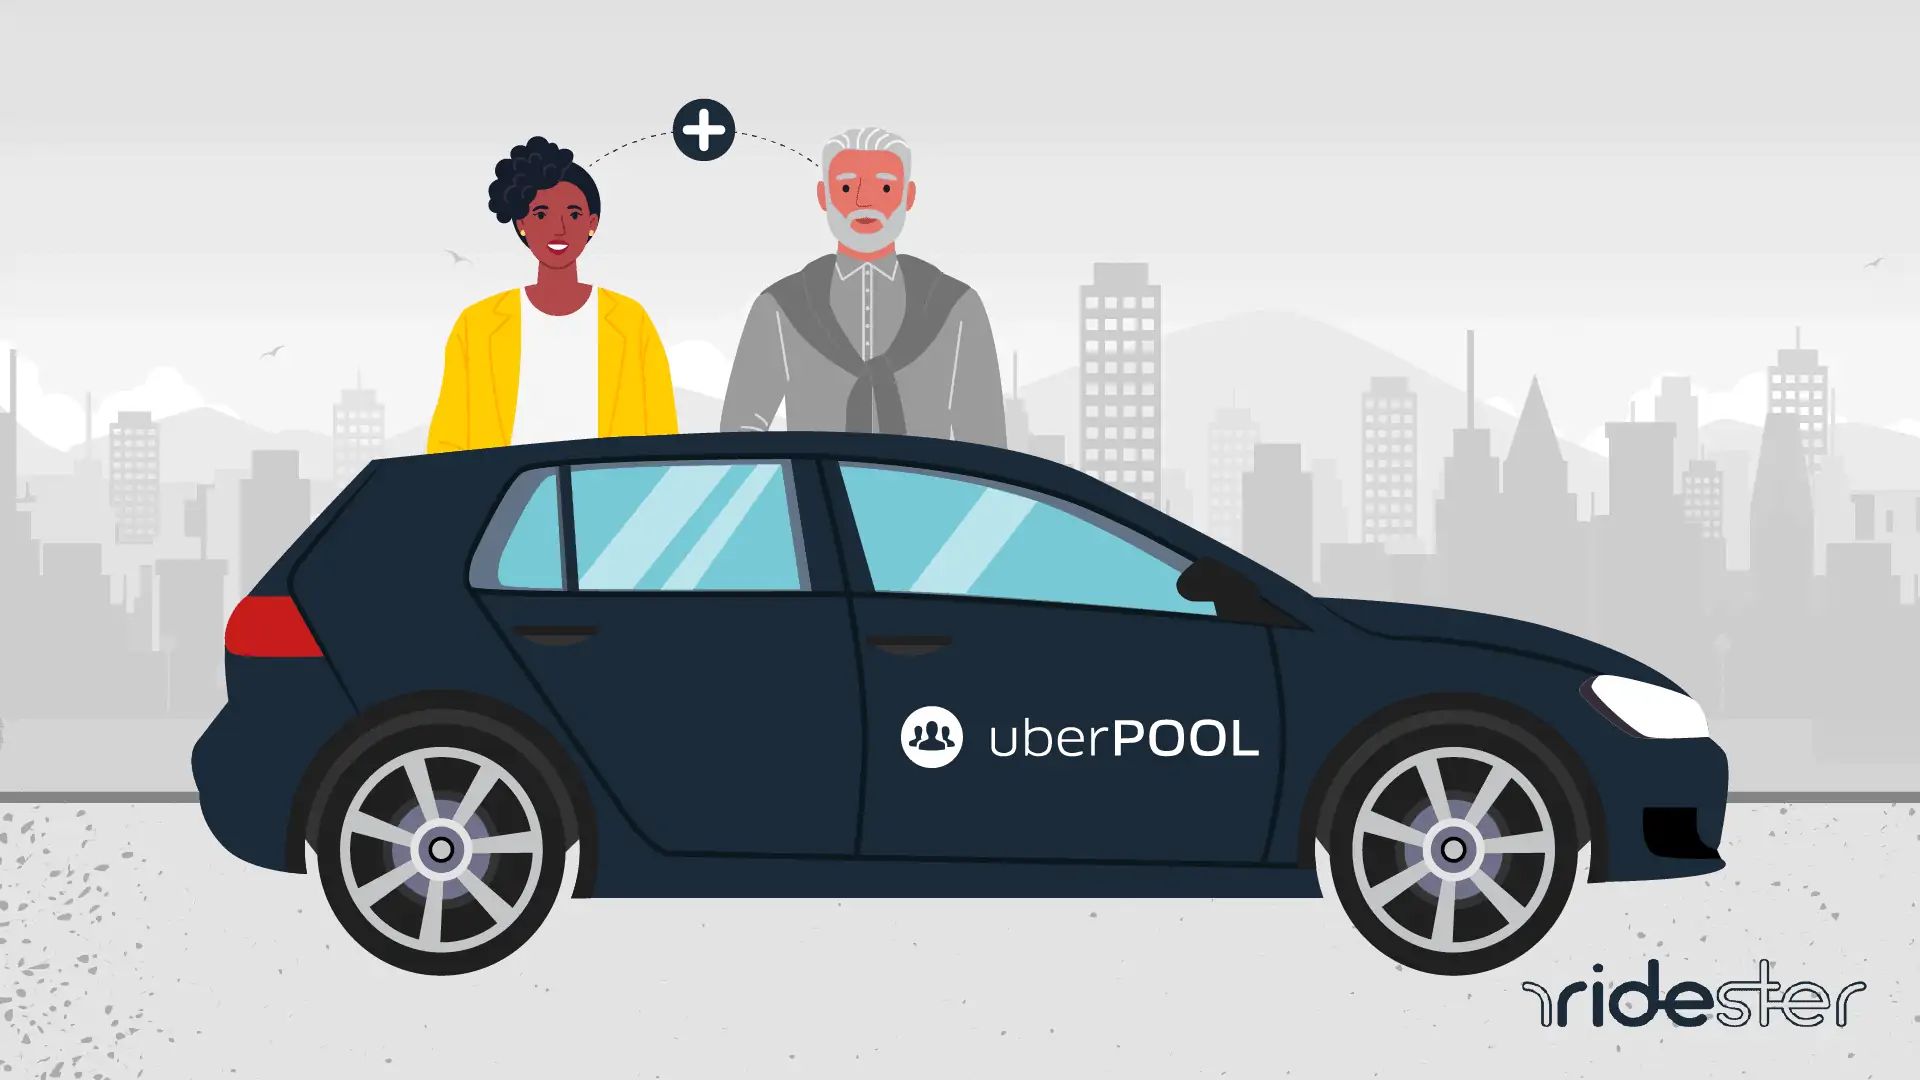 vector graphic showing two uber riders outside of an uberpool vehicle